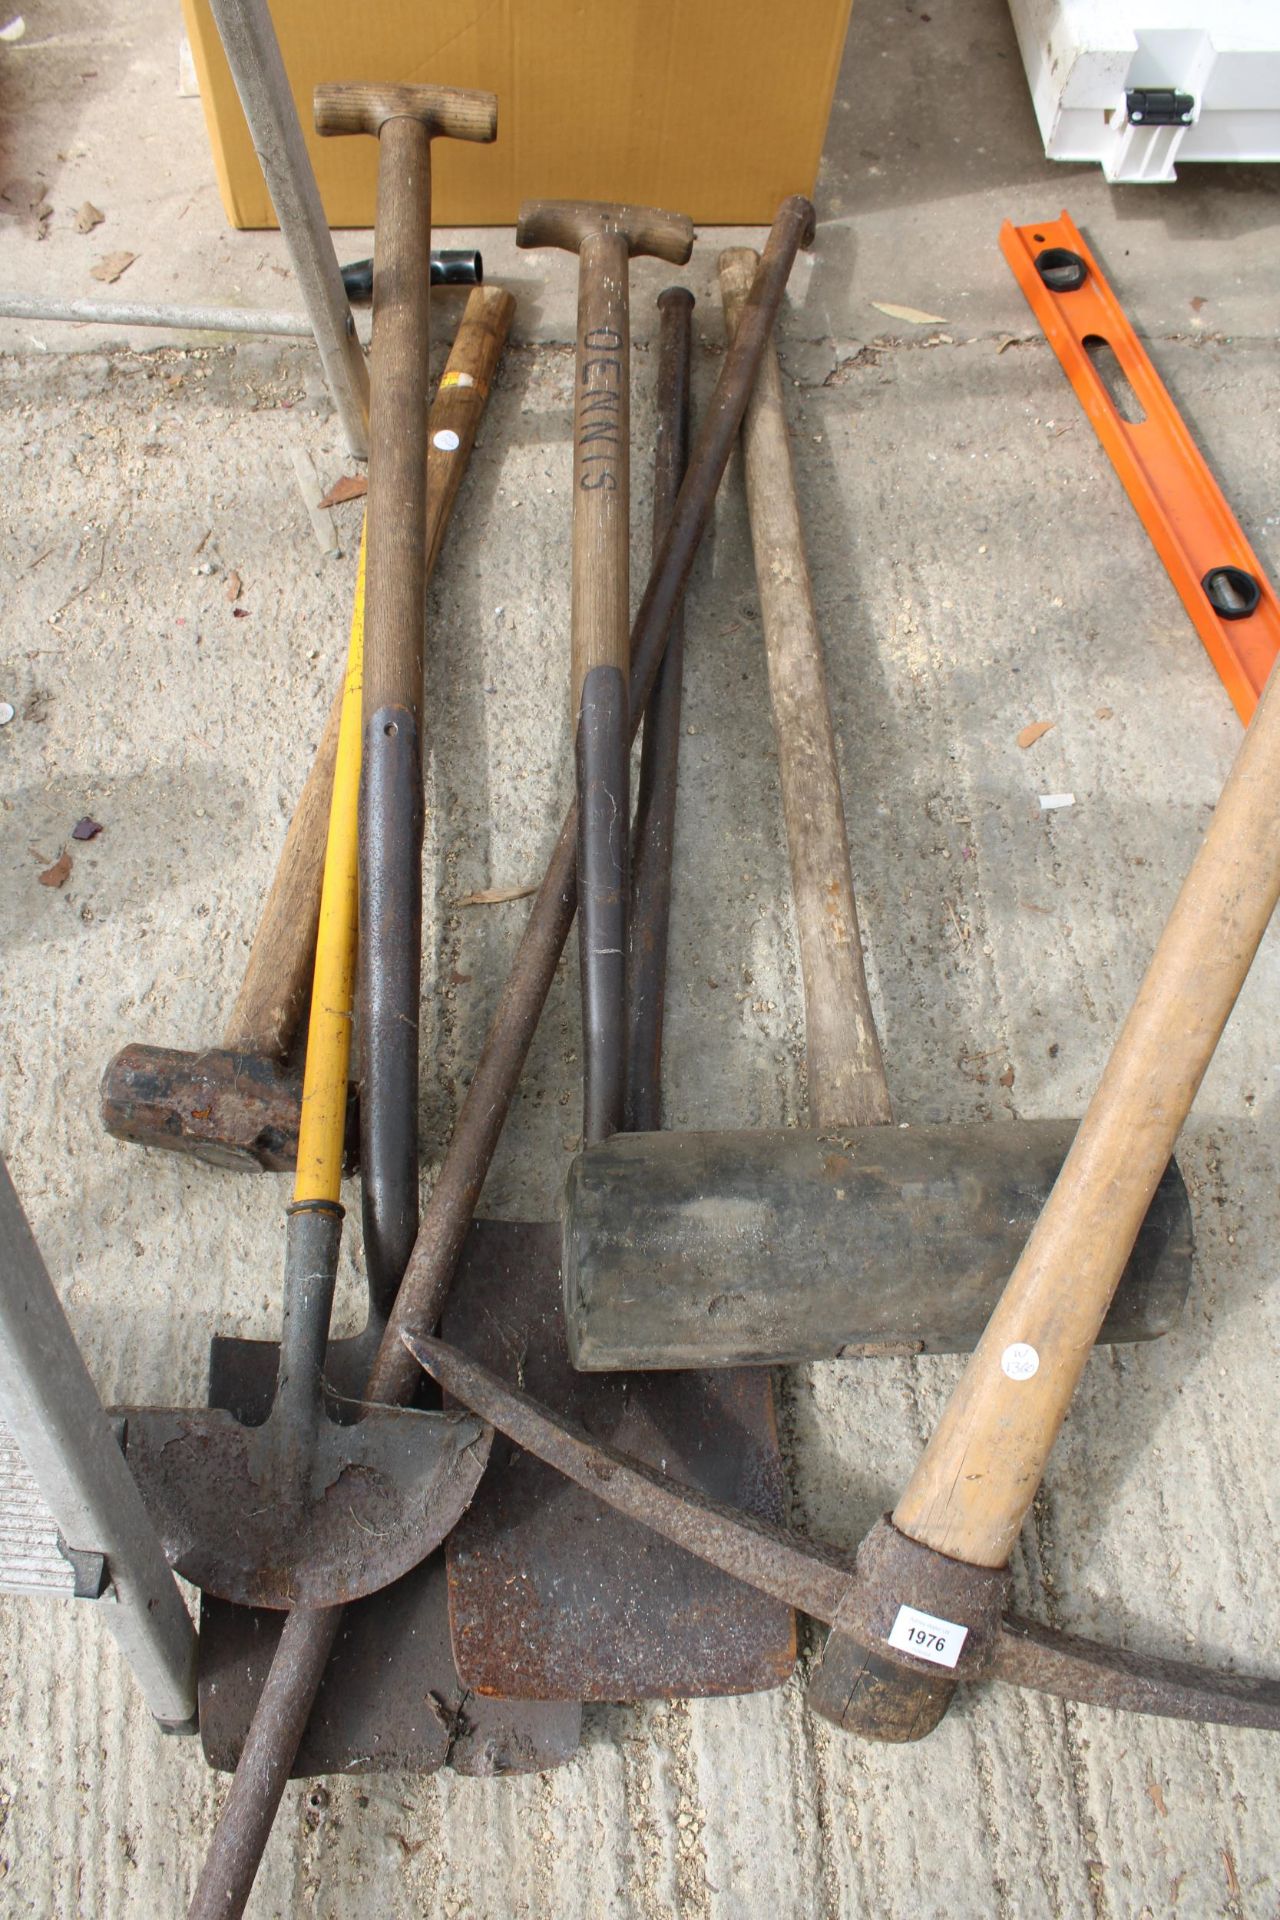 AN ASSORTMENT OF GARDEN TOOLS TO INCLUDE SPADES, A PICK AXE AND A SLEDGE HAMMER ETC - Image 2 of 2